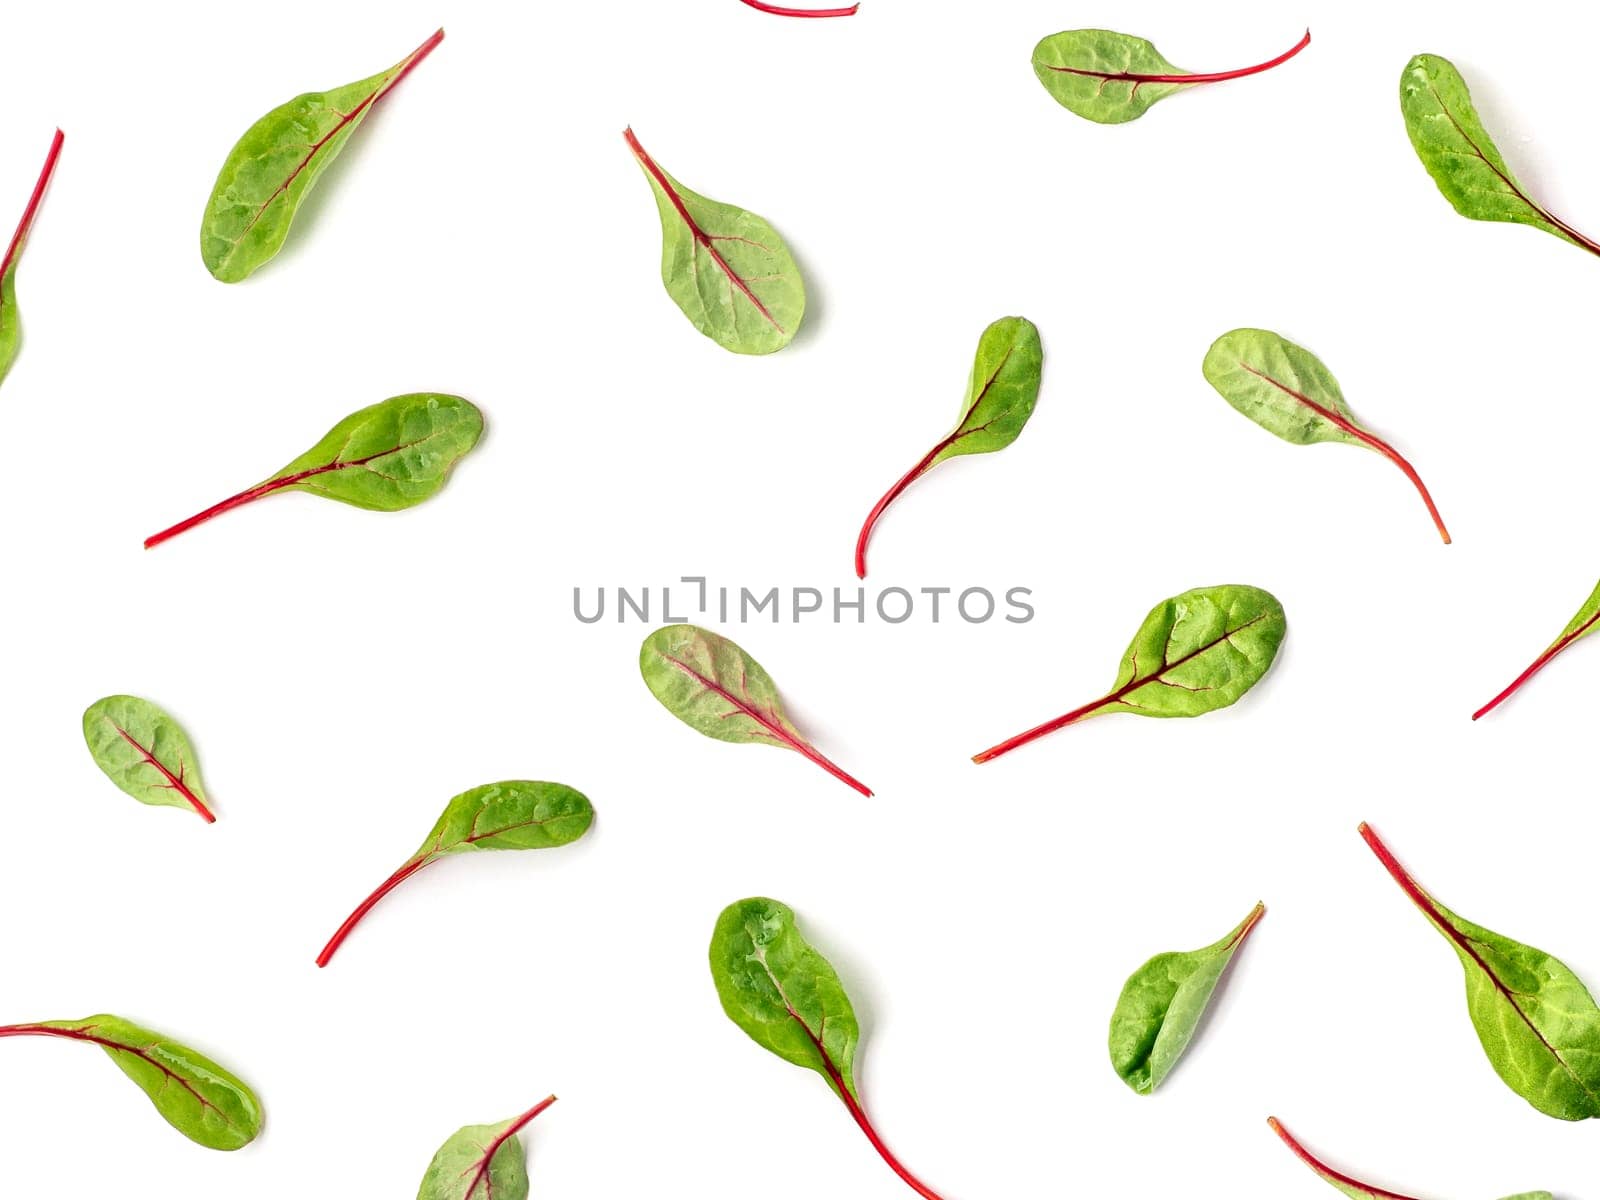 Pattern of fresh green chard leaves or mangold salad leaves on white background. Flat lay or top view fresh baby beet leaves pattern, isolated on white background with clipping path.